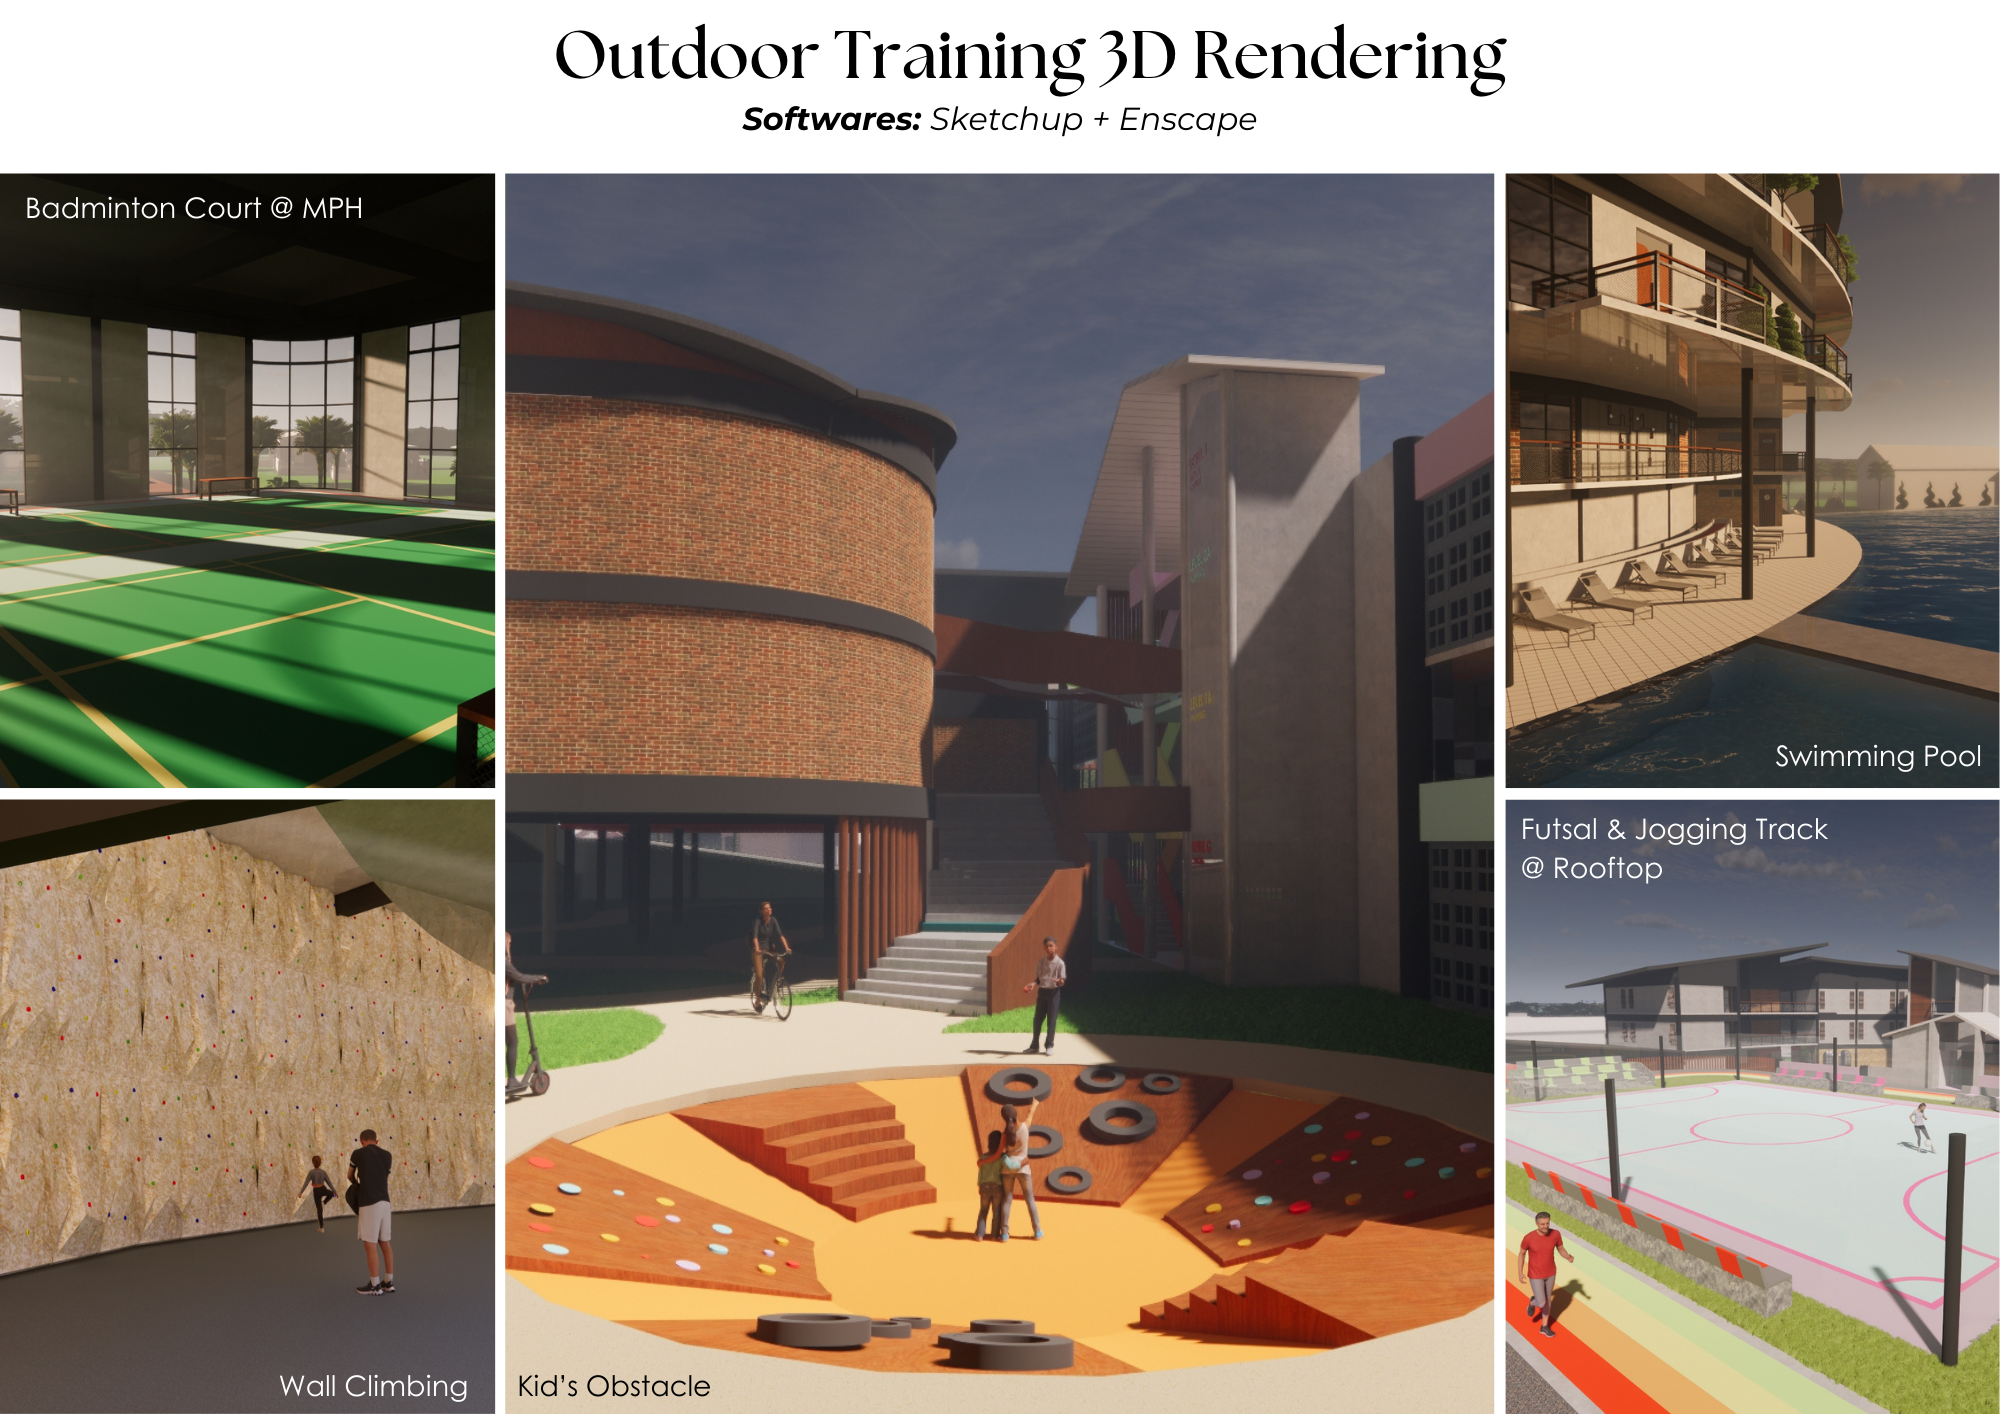 Orthographic 3D Rendering

Softwares: Sketchup + Enscape